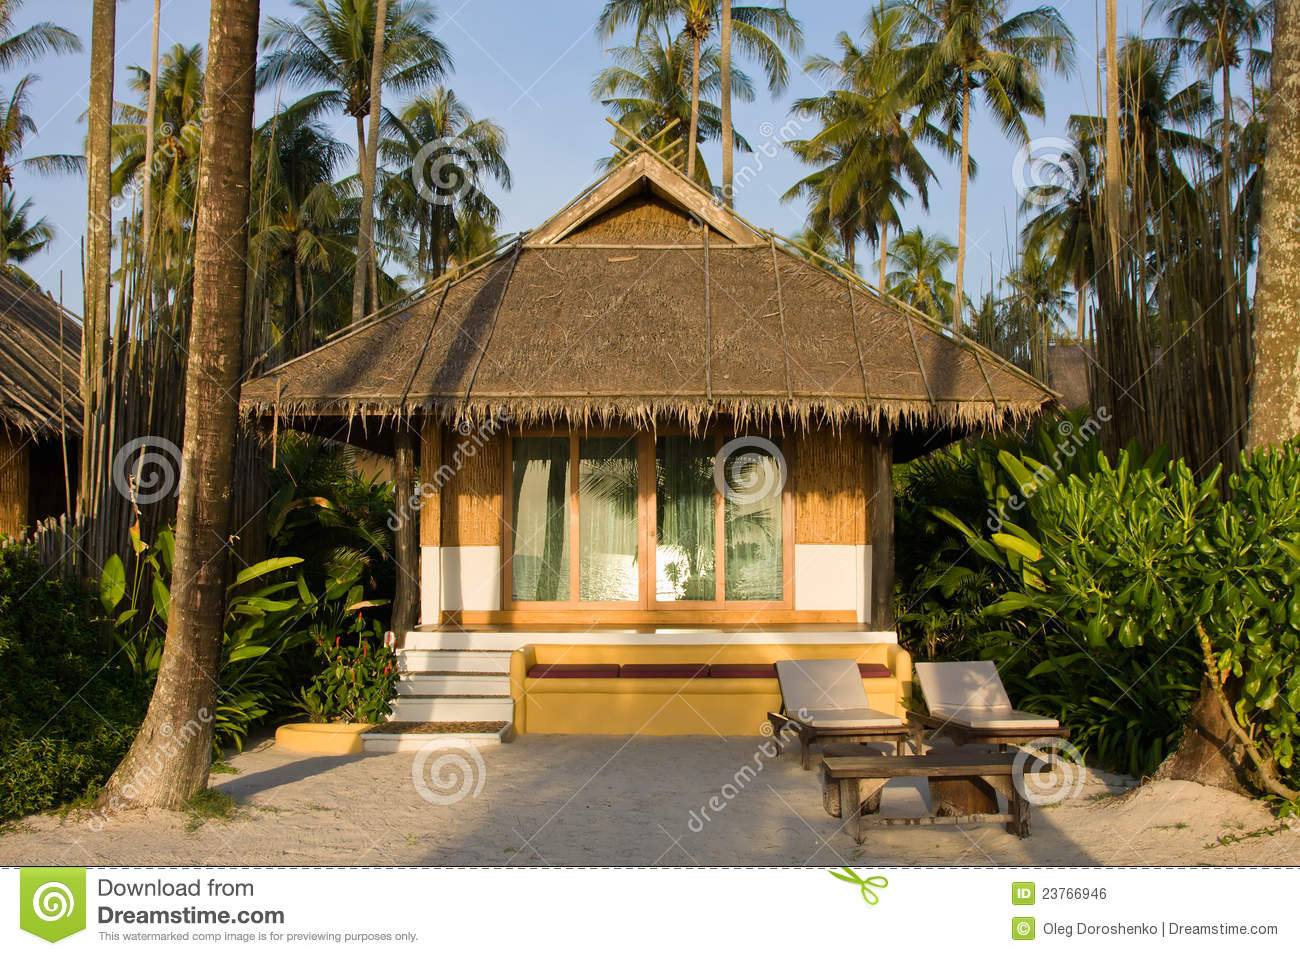 Bungalow In Hotel At Tropical Beach Royalty Free Stock Image   Image